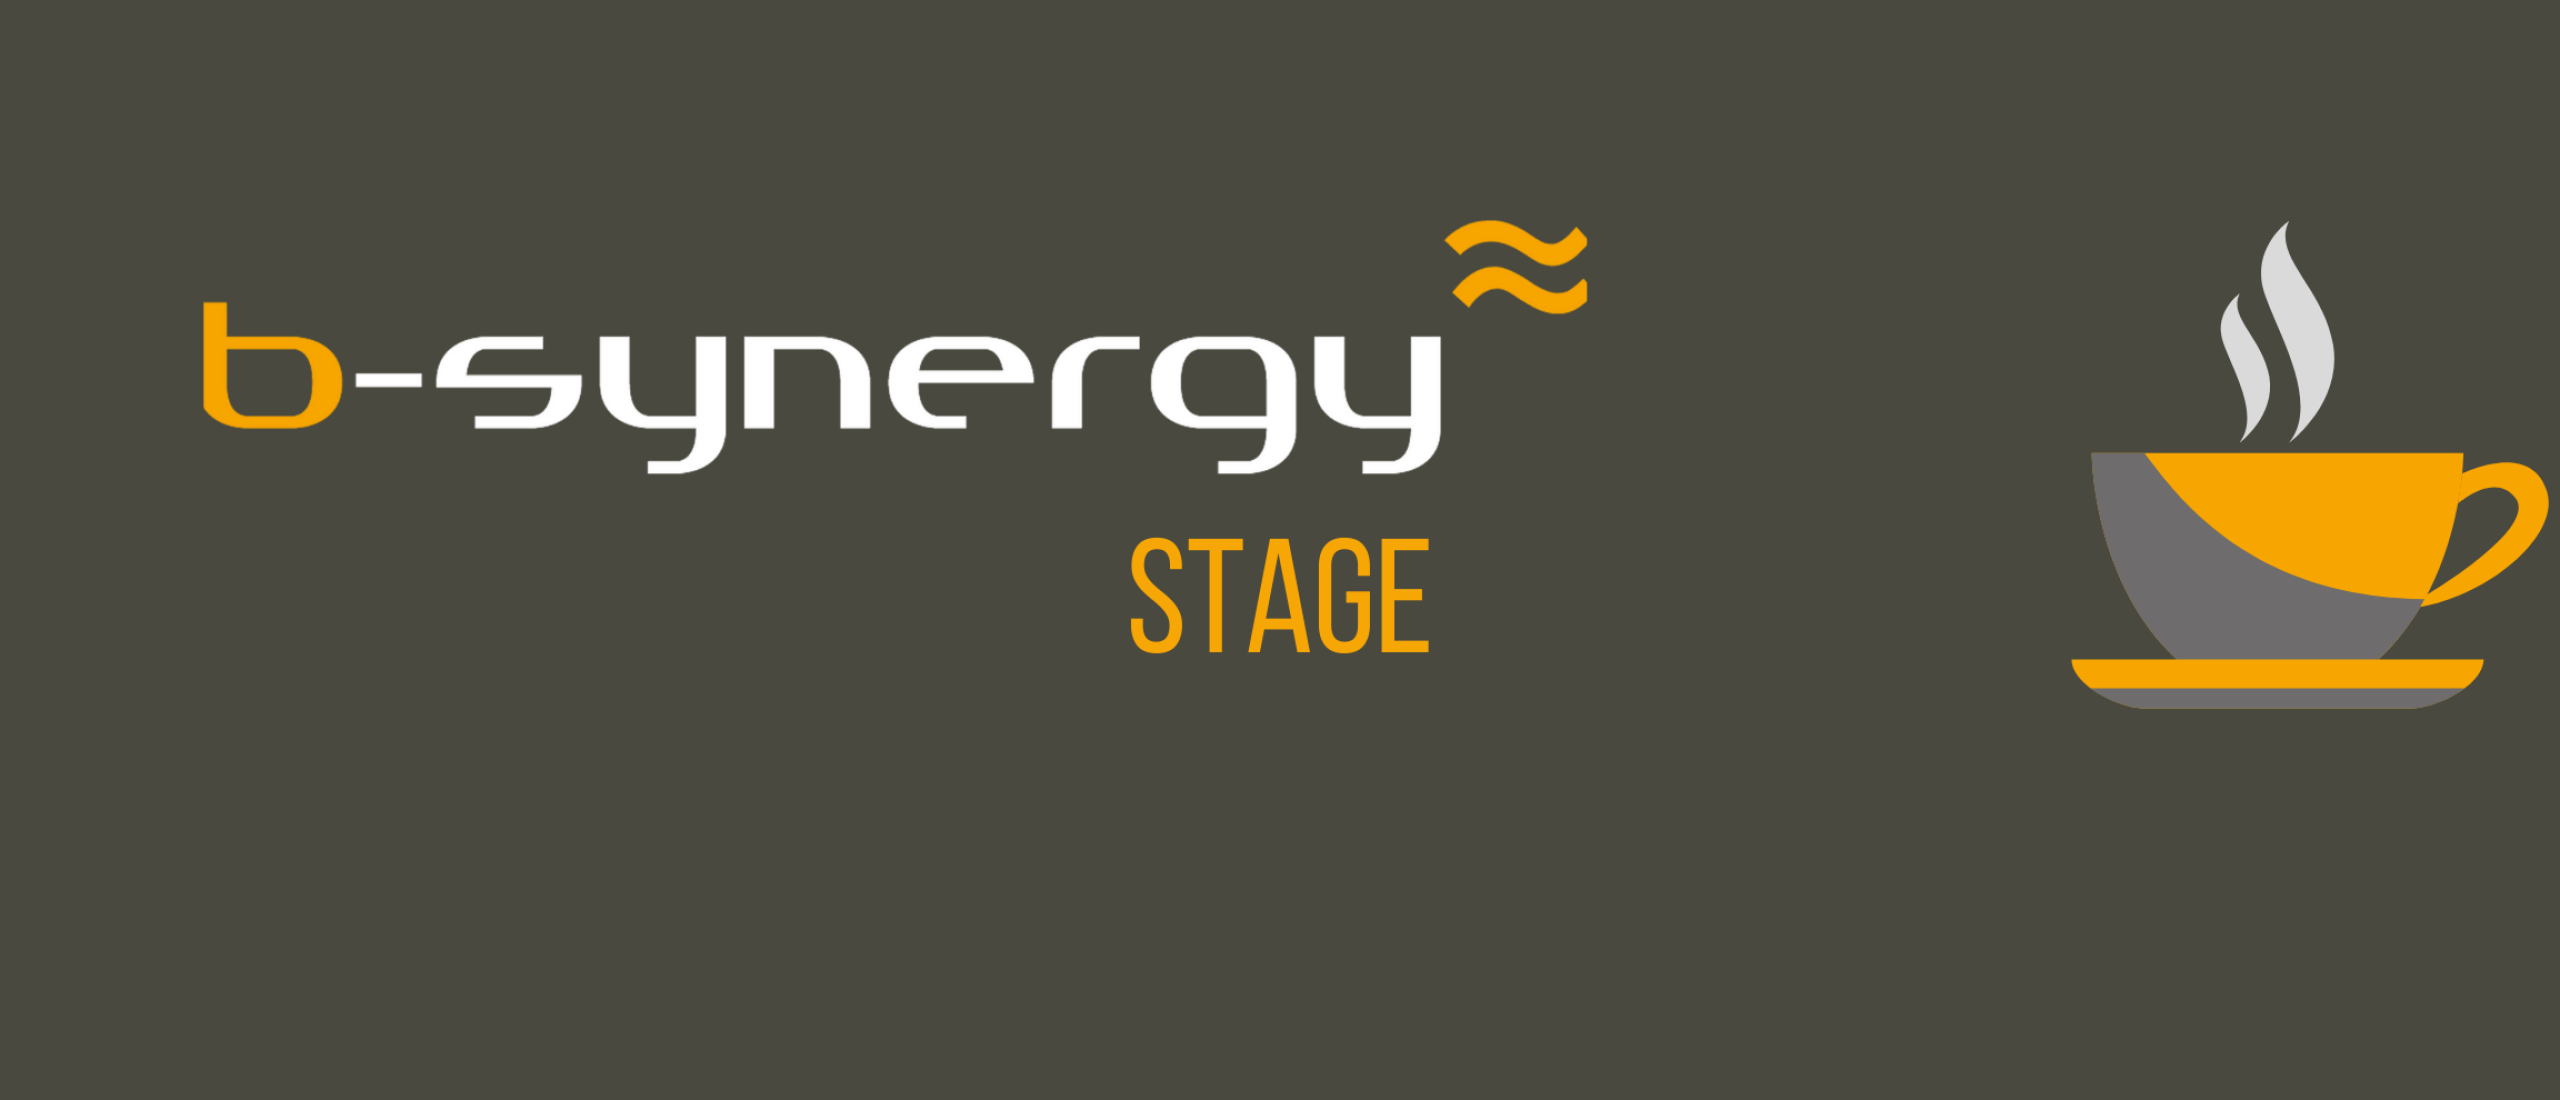 Stage B-Synergy